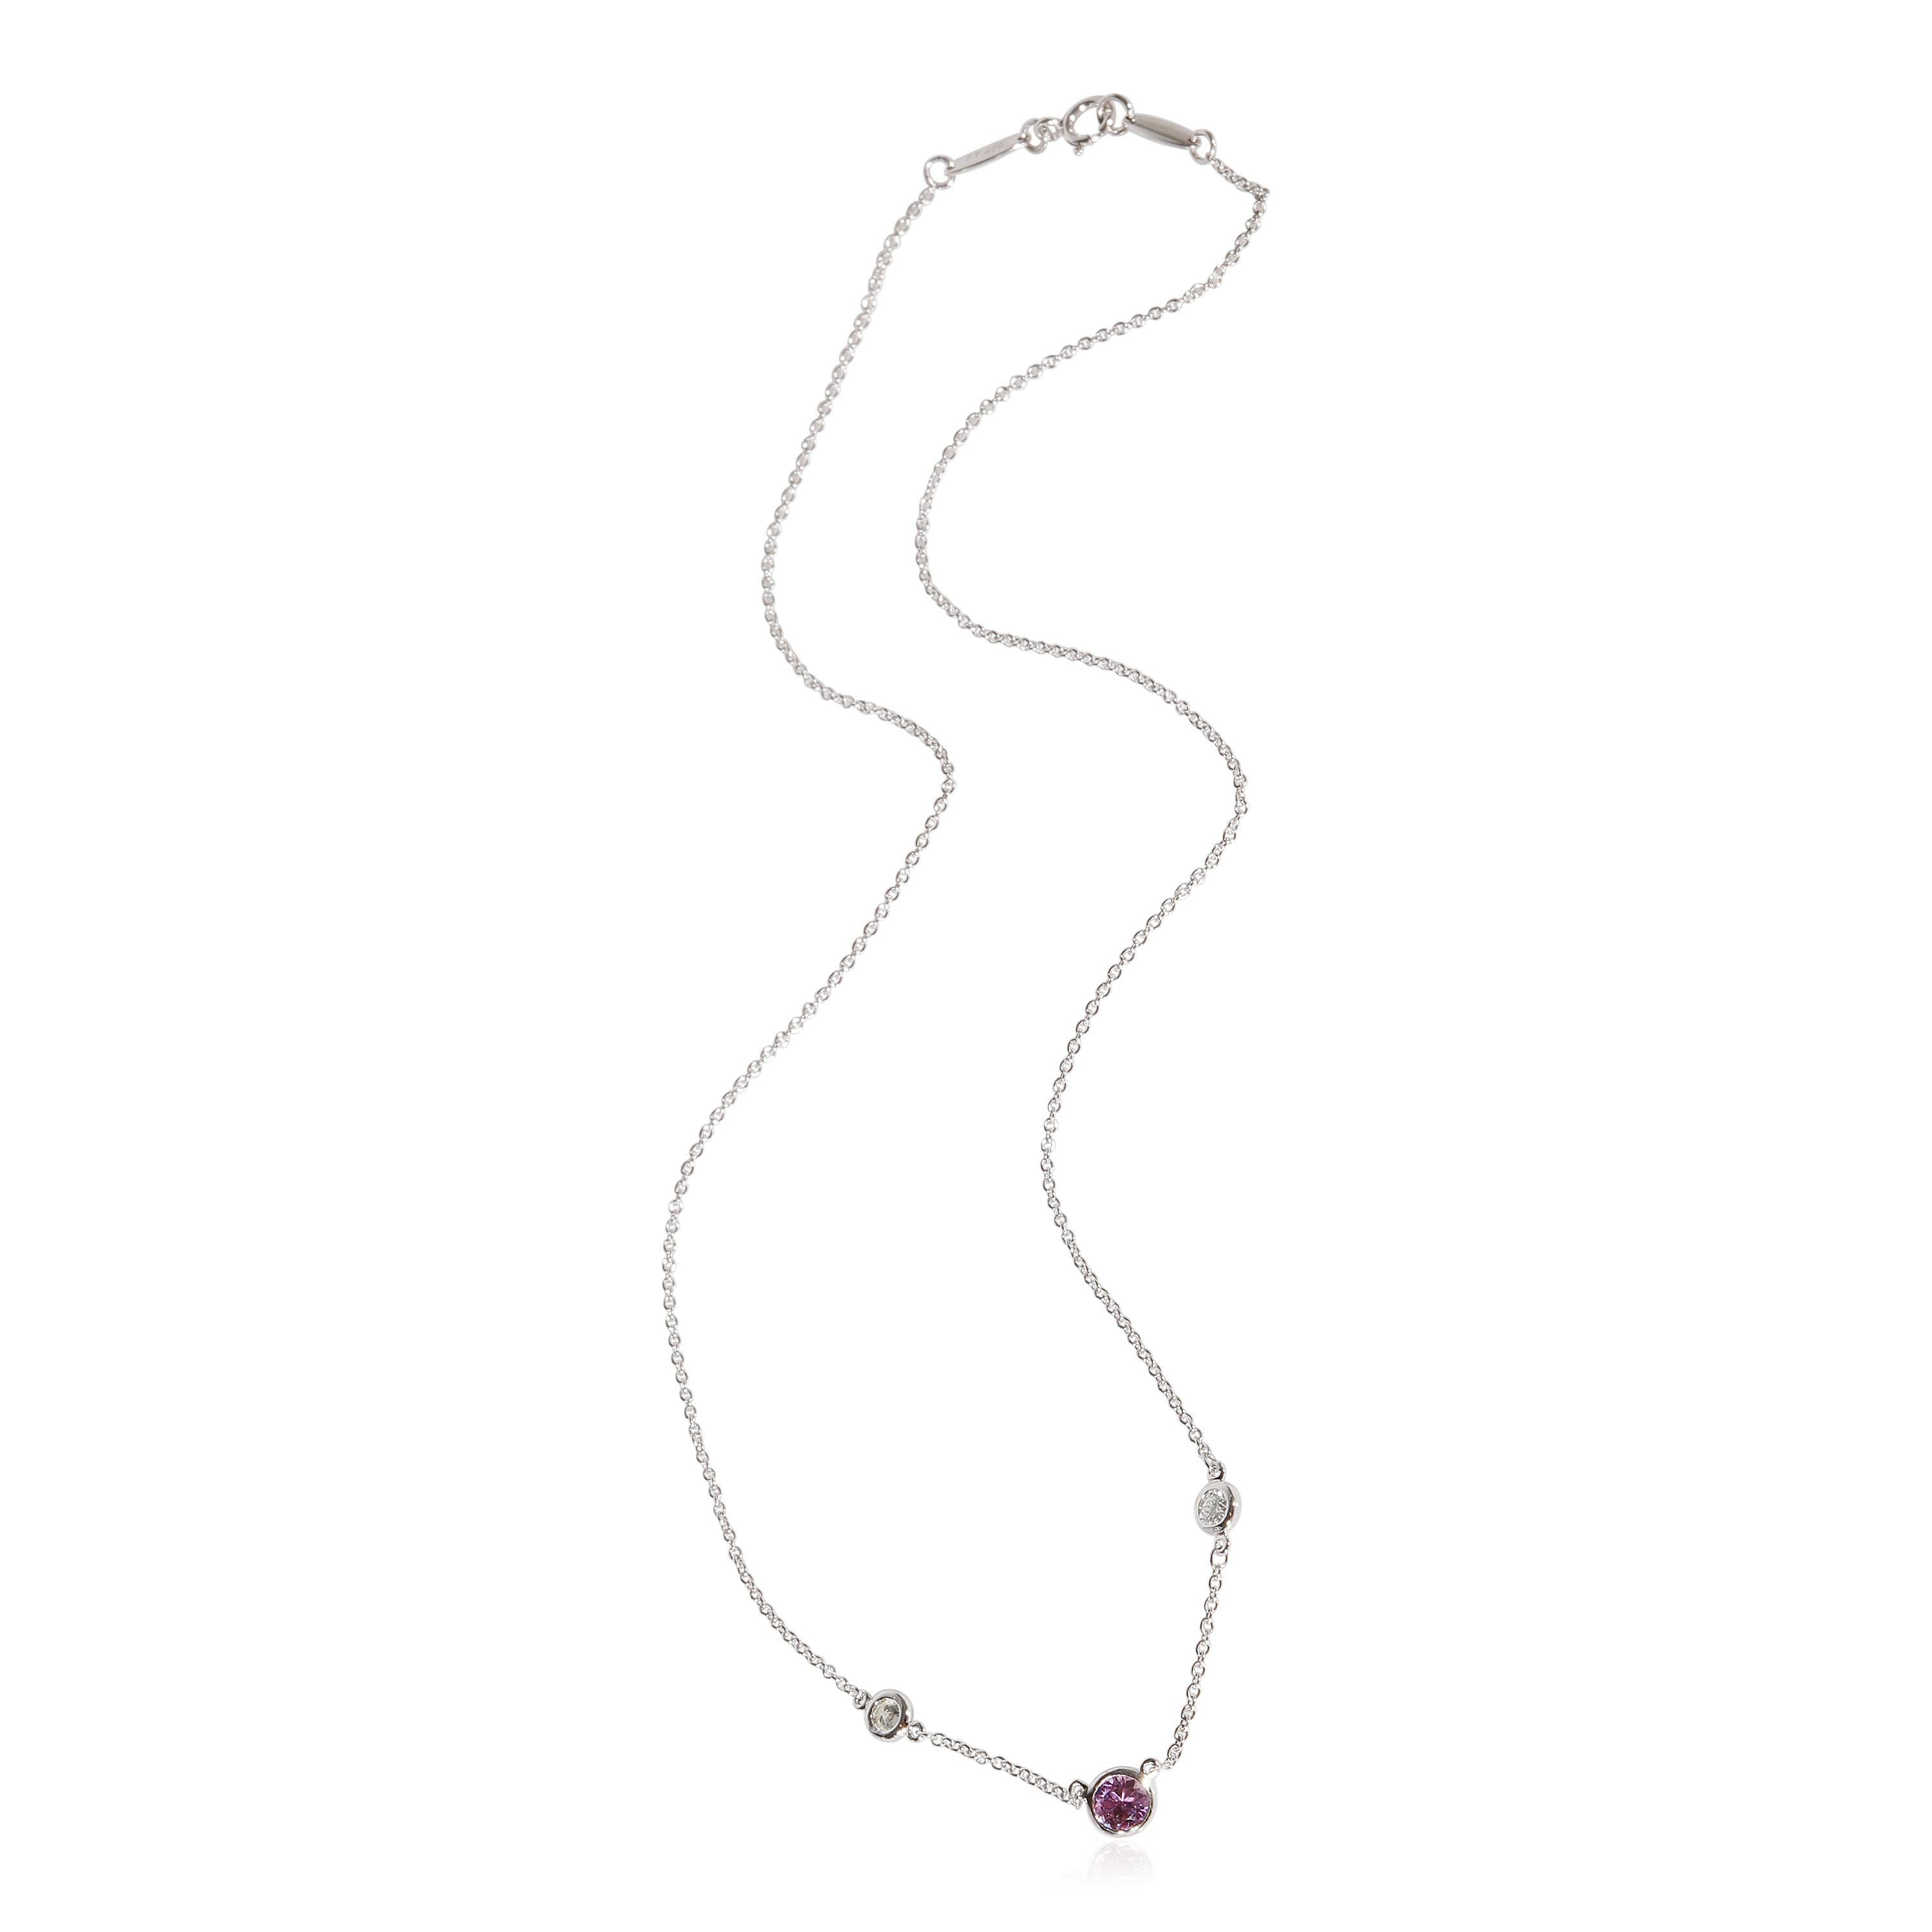 Tiffany & Co. Elsa Peretti Pink Sapphire Diamond by the Yard Necklace

PRIMARY DETAILS
SKU: 121666
Listing Title: Tiffany & Co. Elsa Peretti Pink Sapphire Diamond by the Yard Necklace
Condition Description: Retails for 4100 USD. In excellent